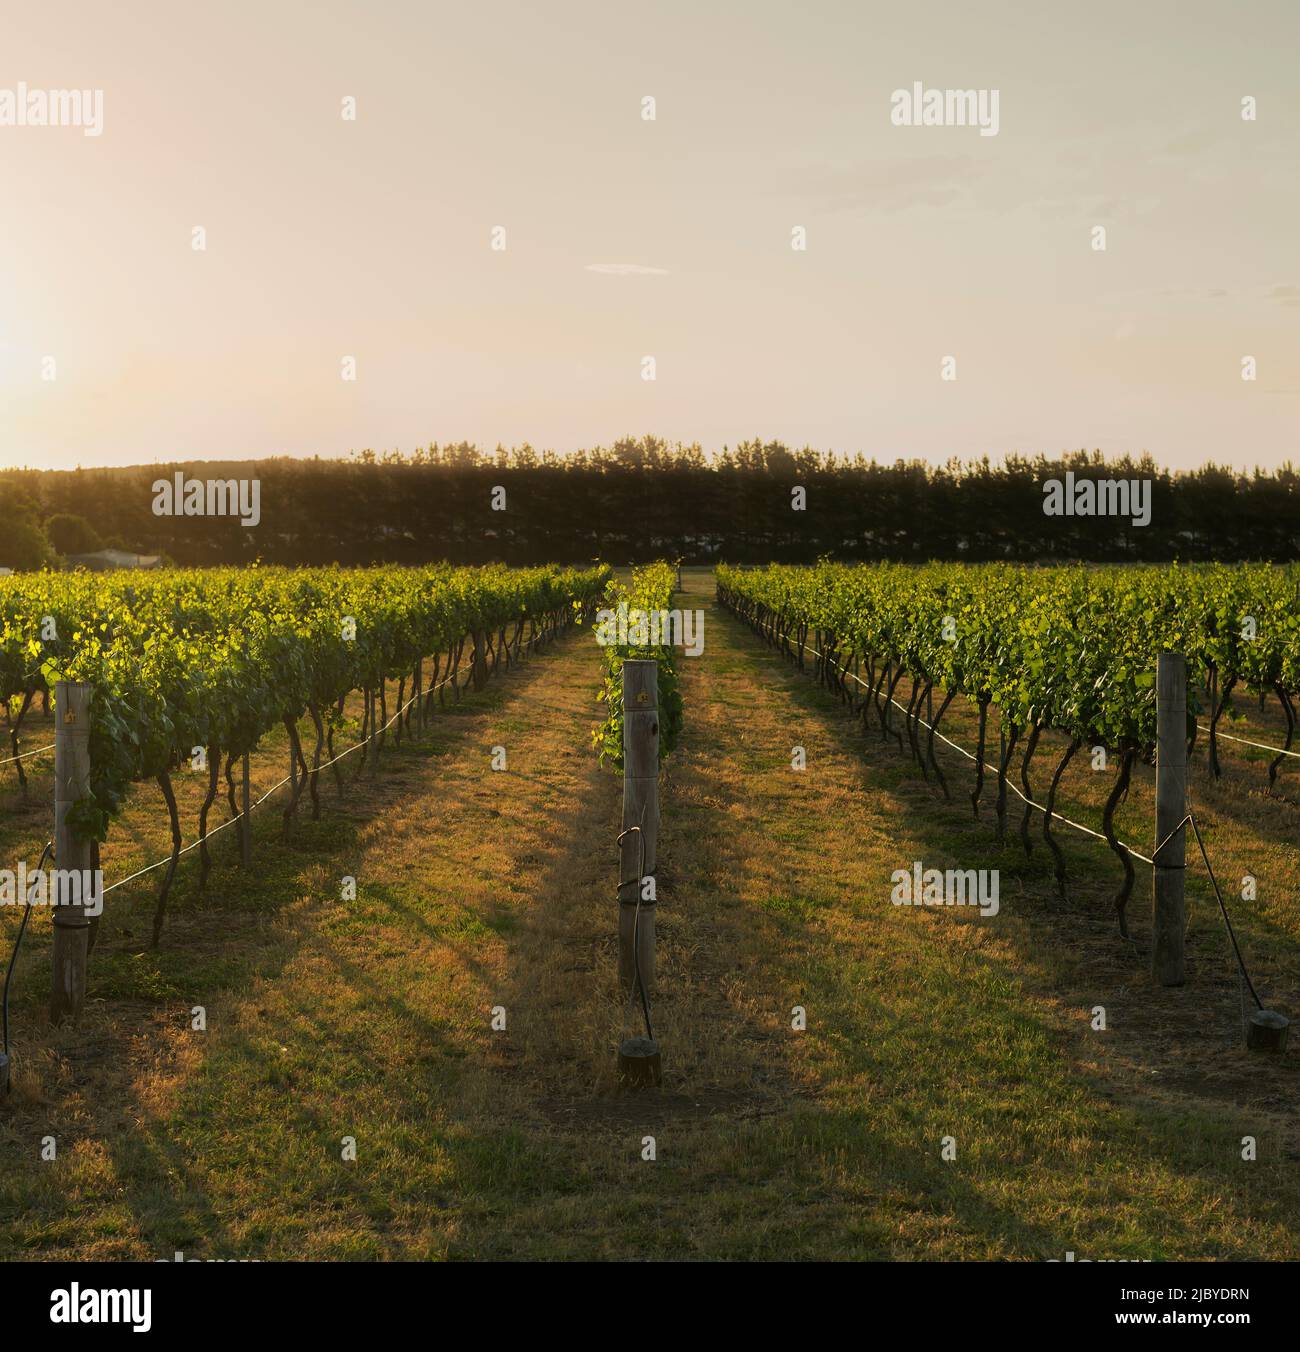 Golden afternoon light shining through grapevines in vineyard Stock Photo